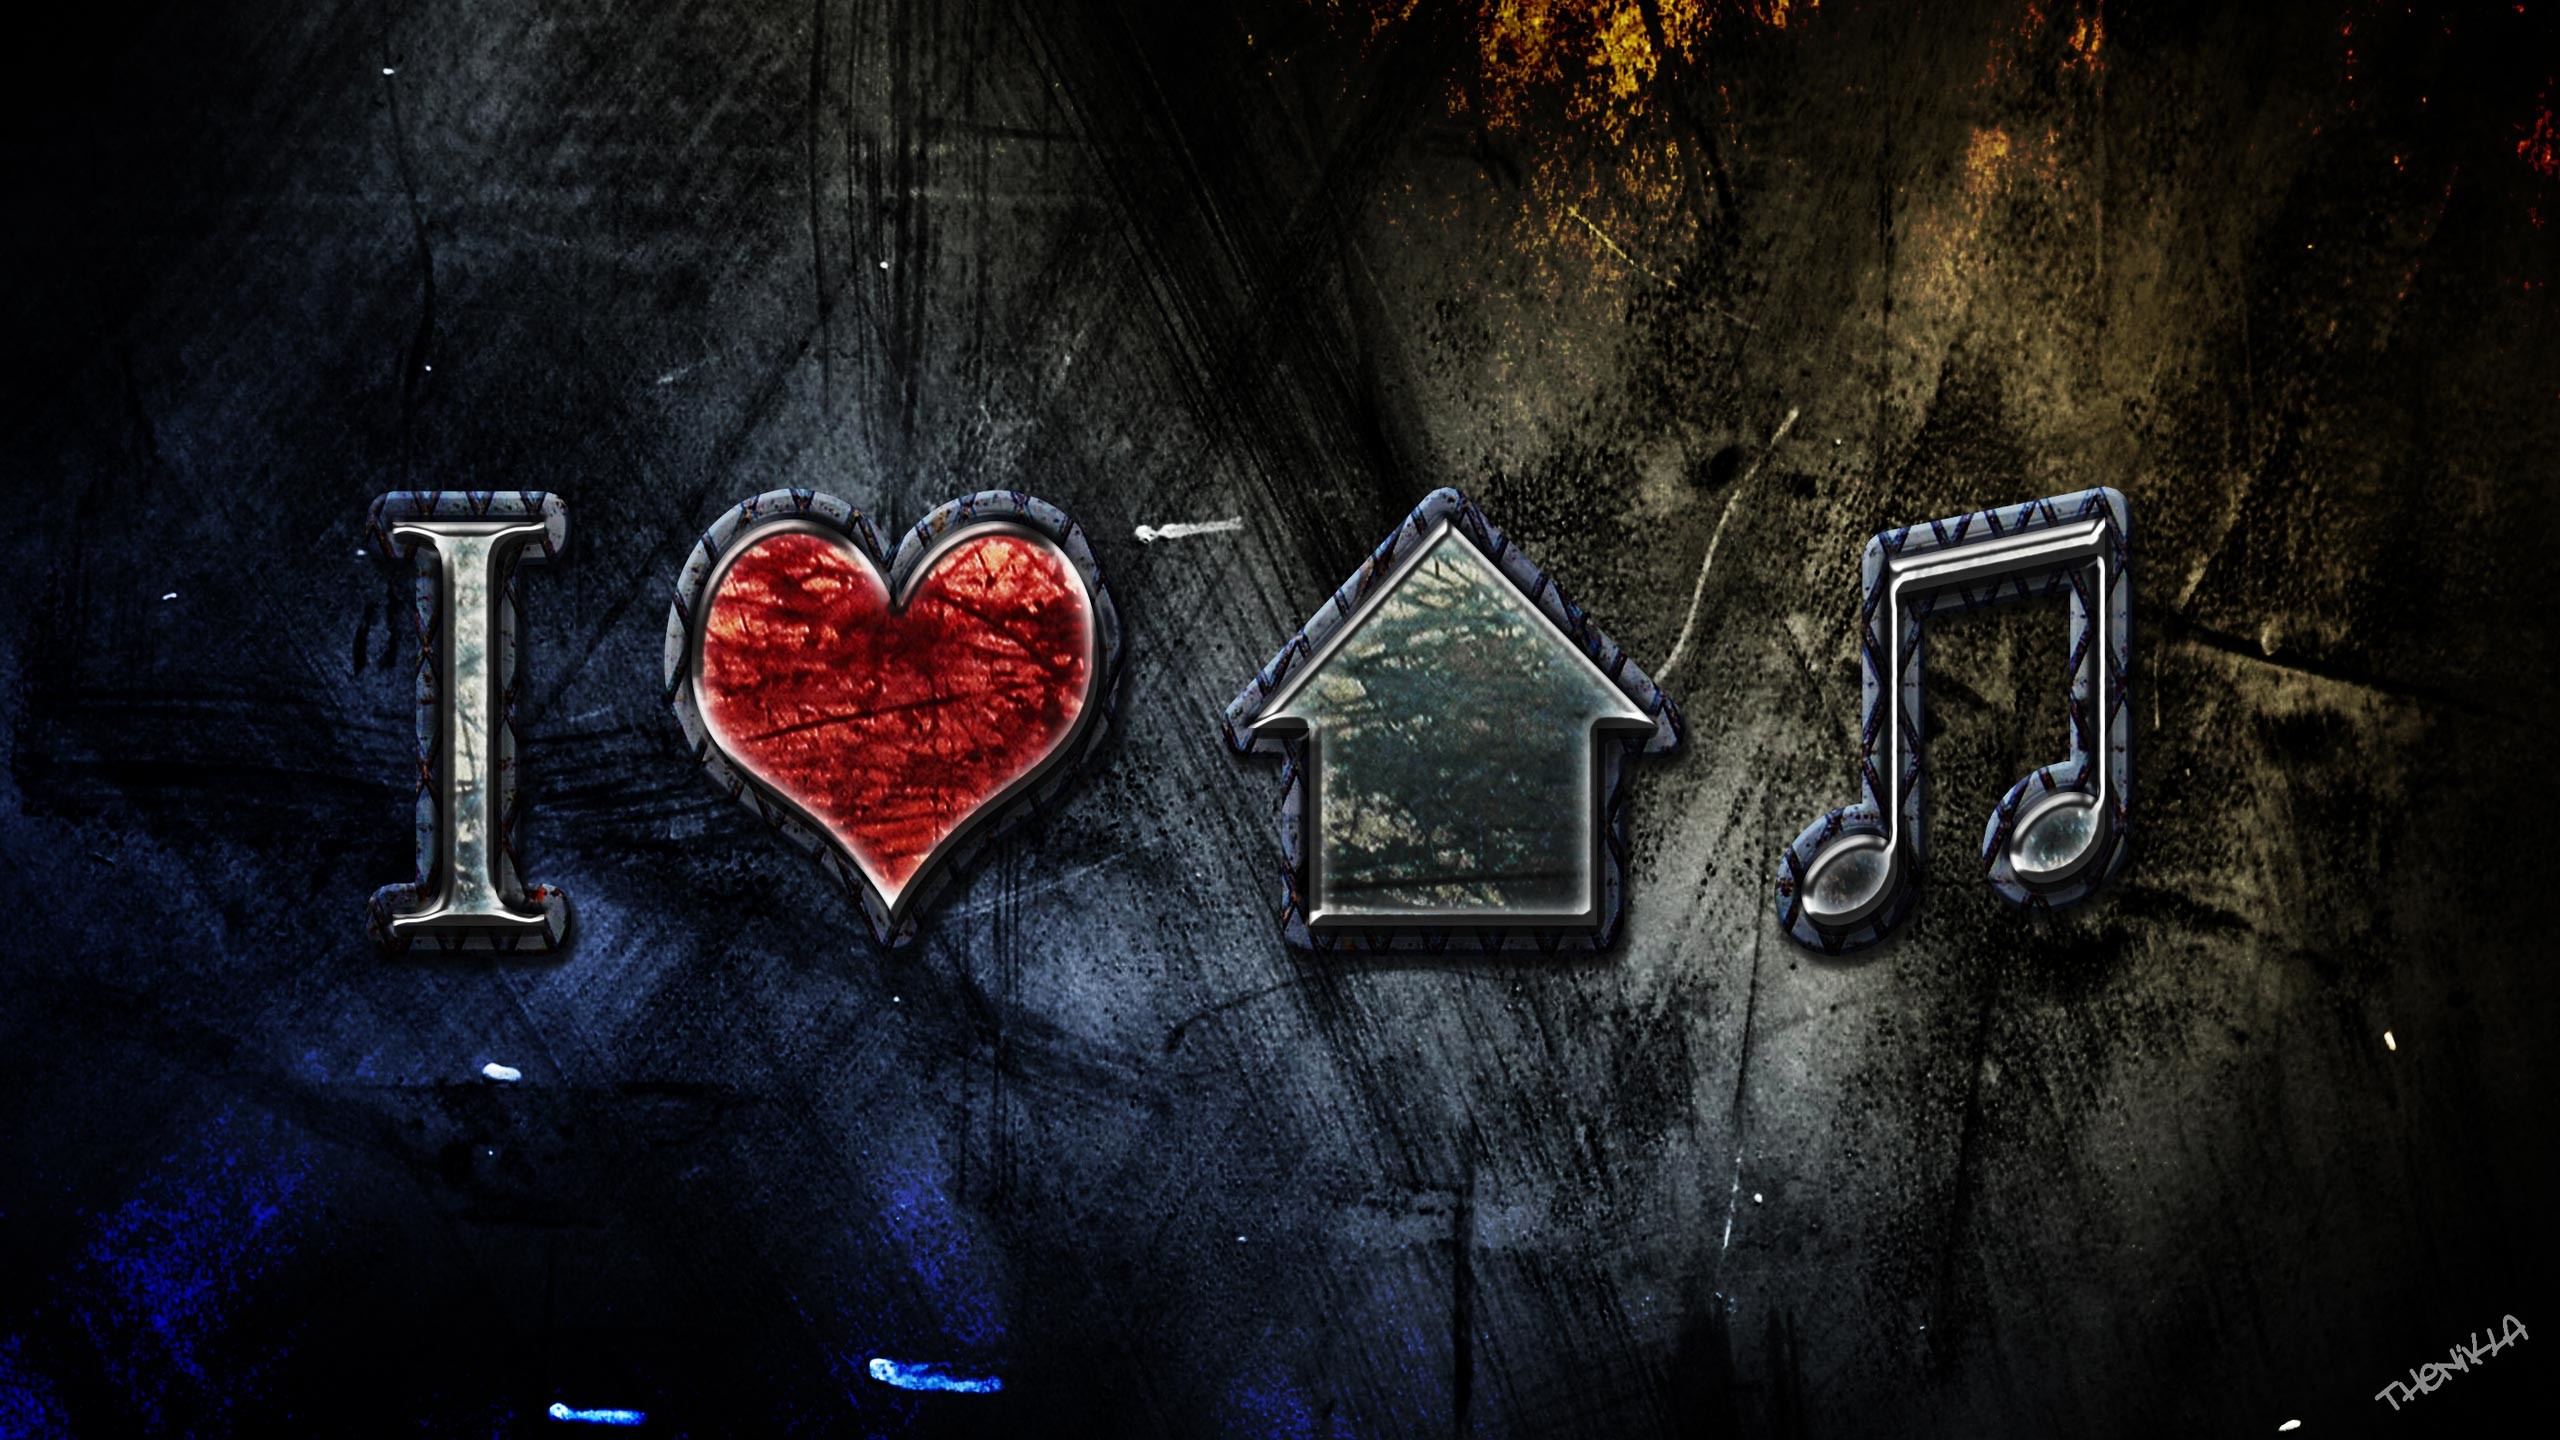 2560x1440 Love House Music Wallpaper - MixHD wallpapers